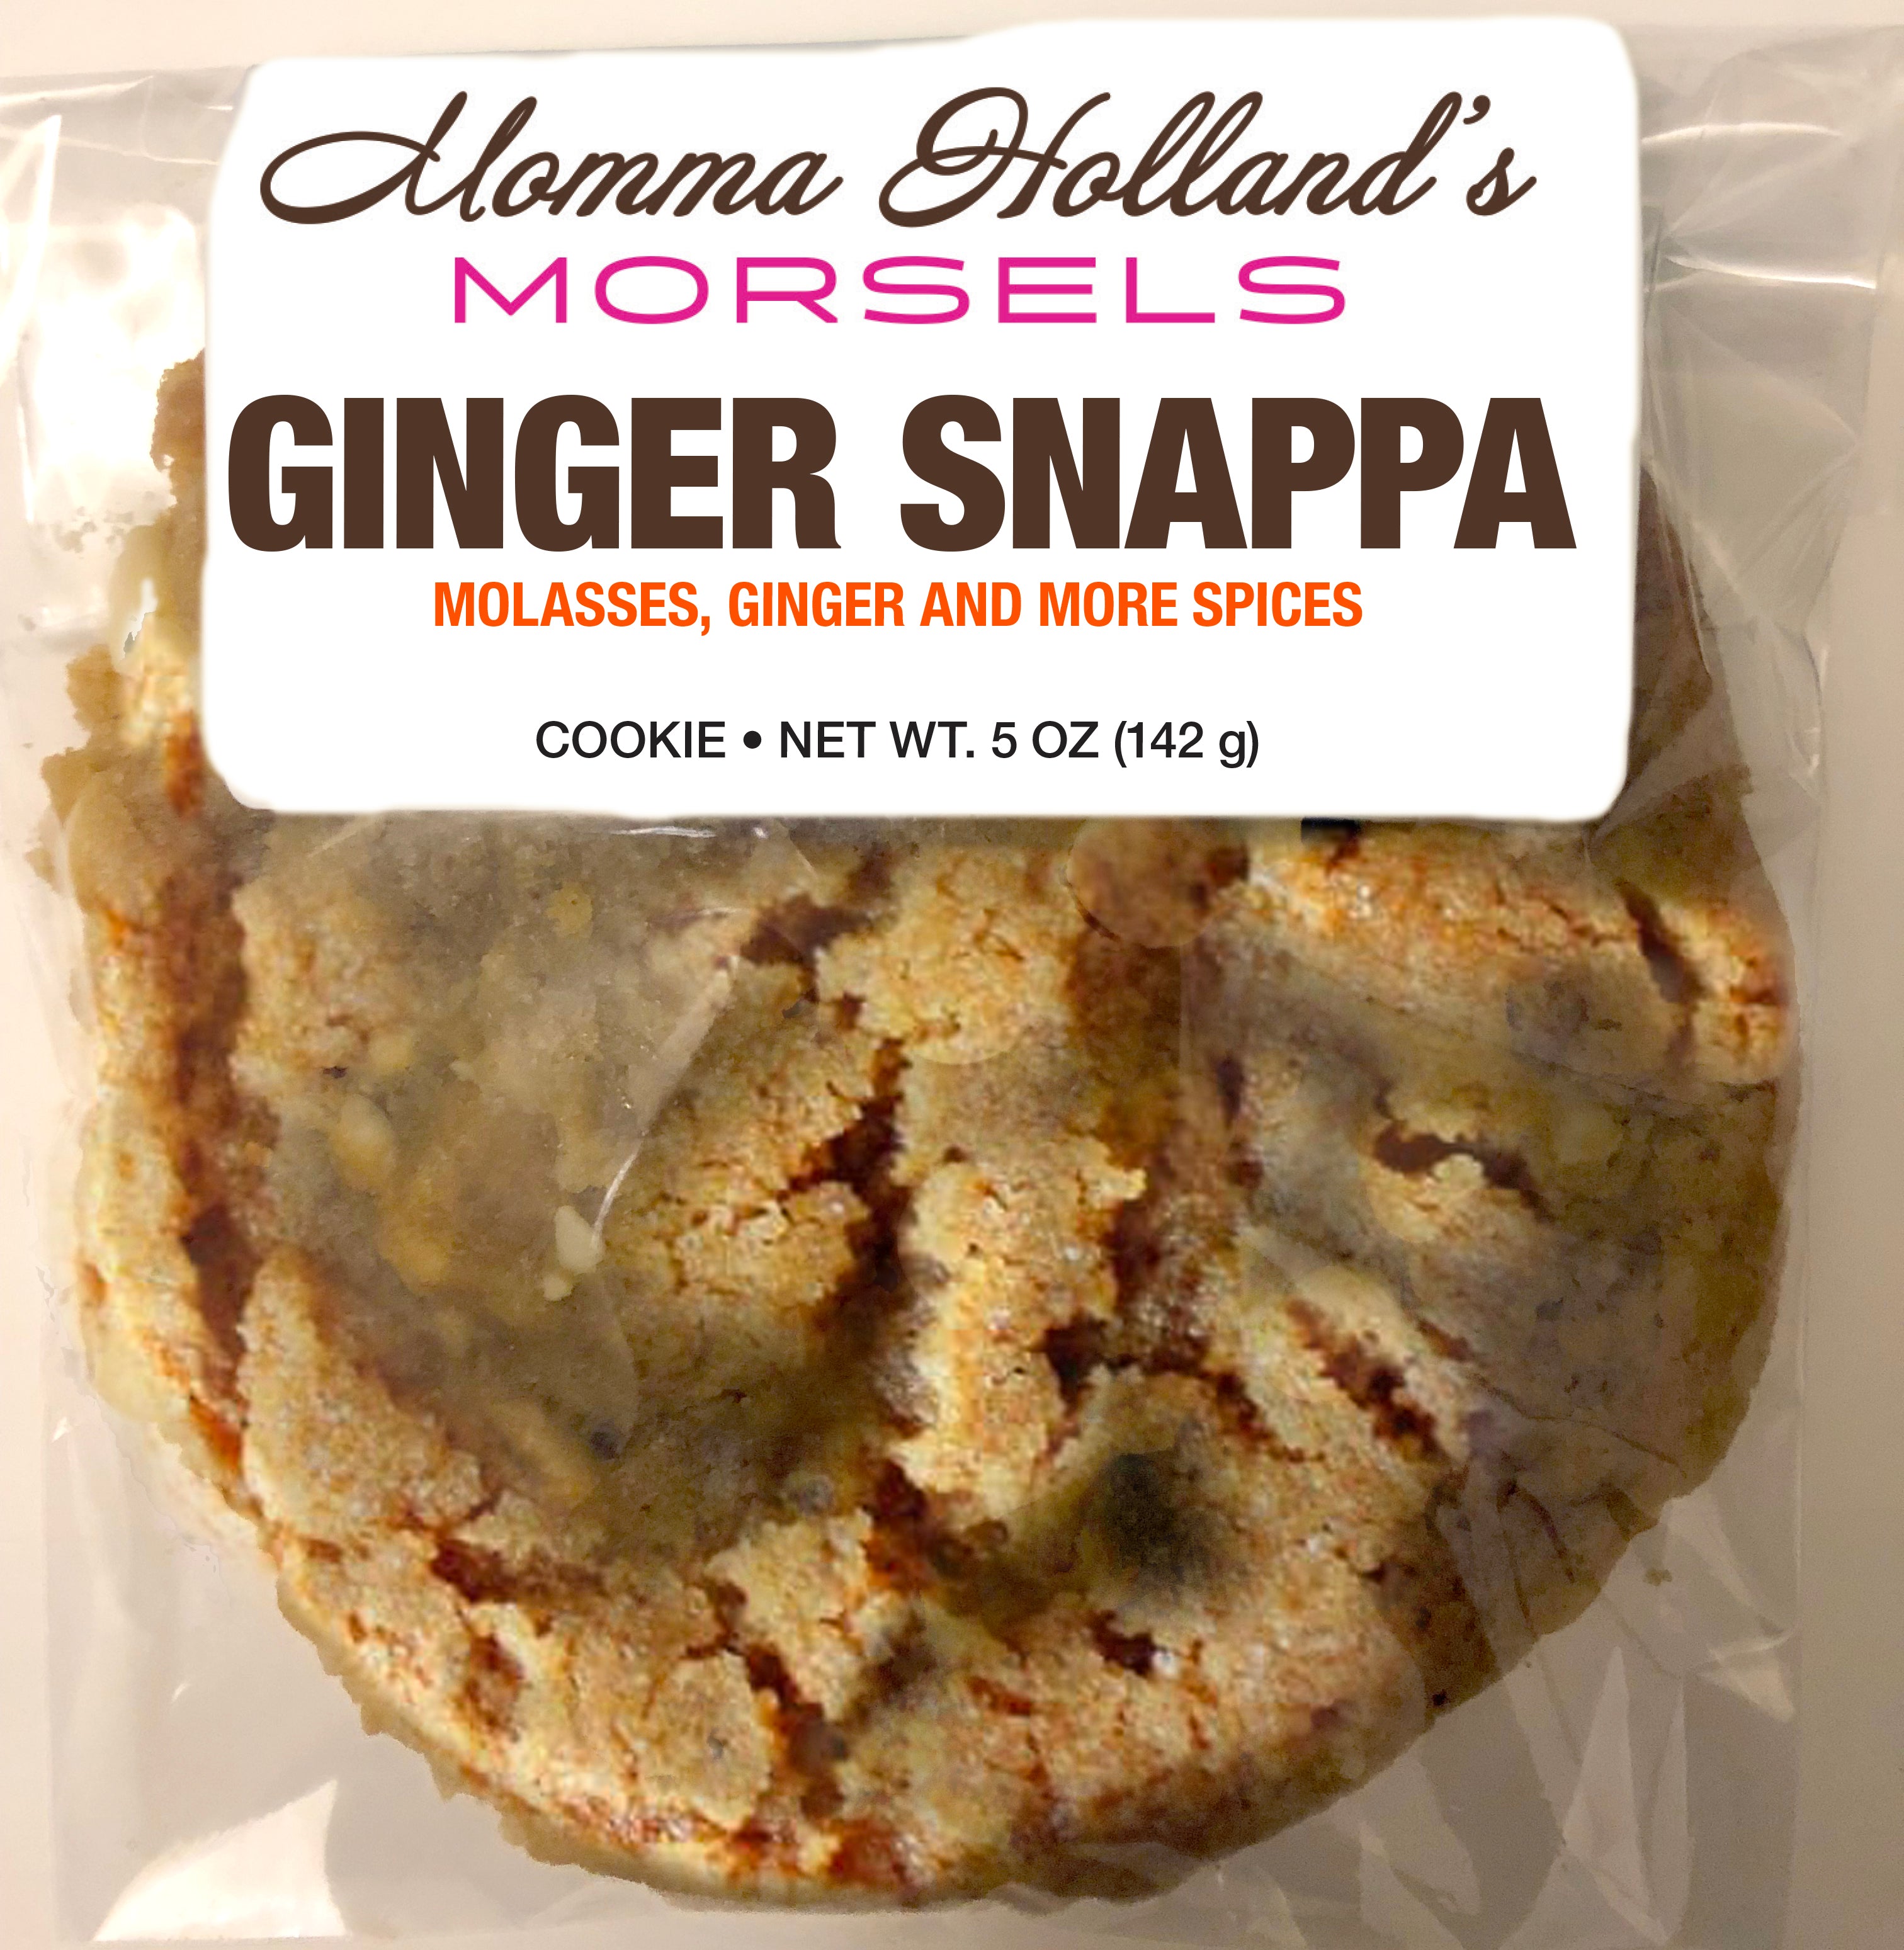 GINGER SNAPPA - Momma Holland's Morsels